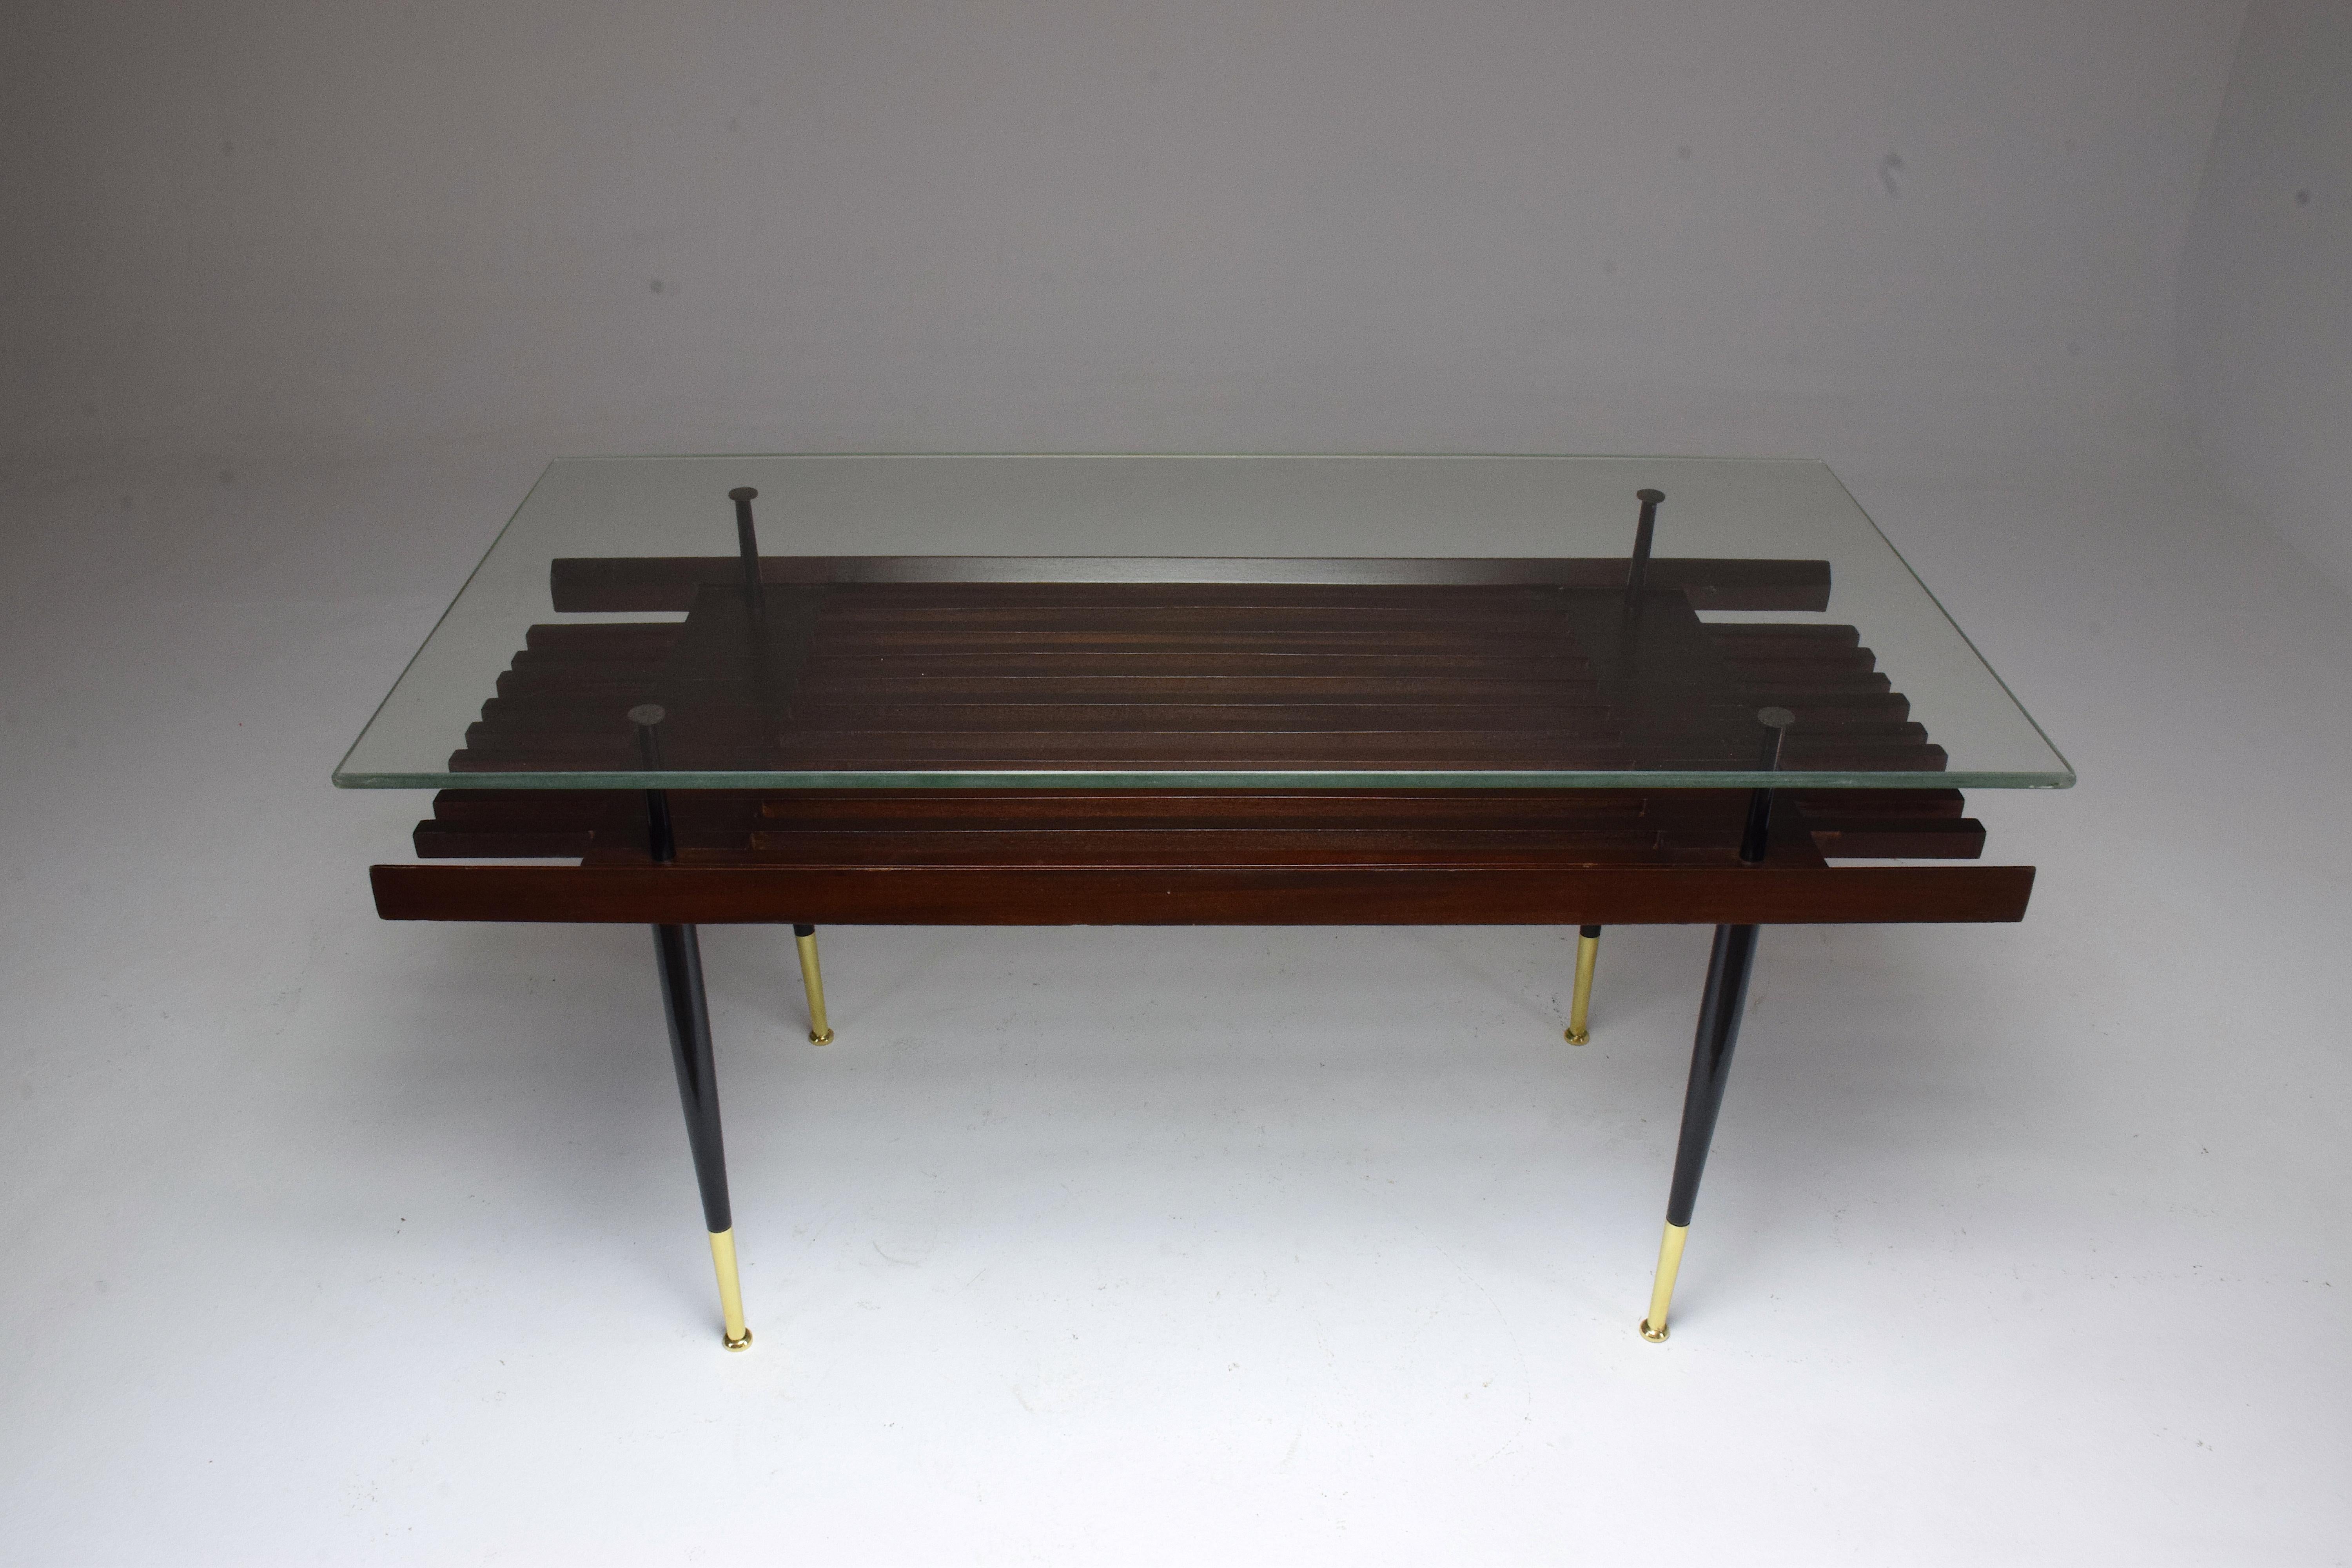 A Mid-Century Modern vintage rectangular coffee or side table with straight lacquered steel legs, polished brass endings and a clear glass tabletop.
Italy, circa 1950's.
-----
All our pieces are fully restored at our atelier and we only offer items